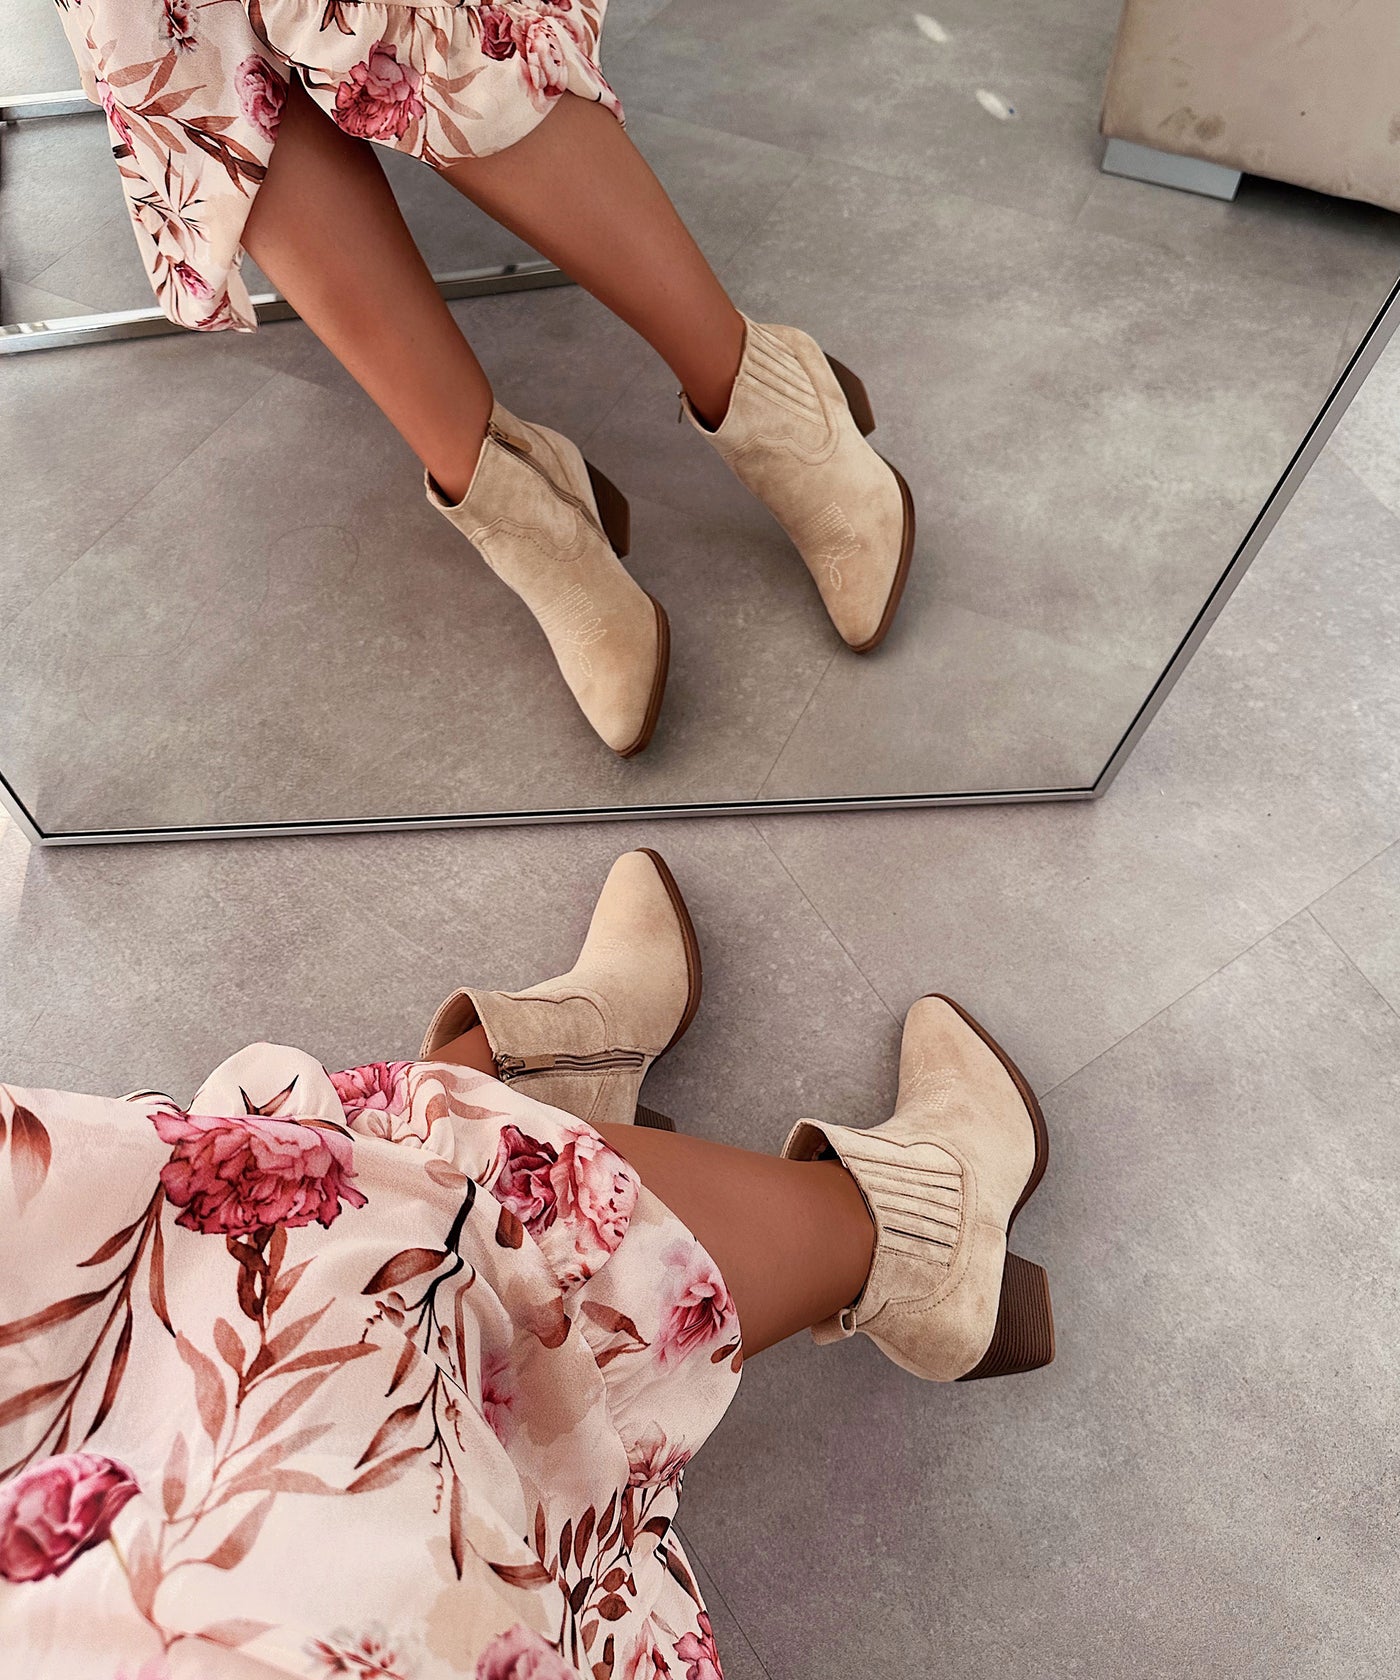 Allie beige ankle boots